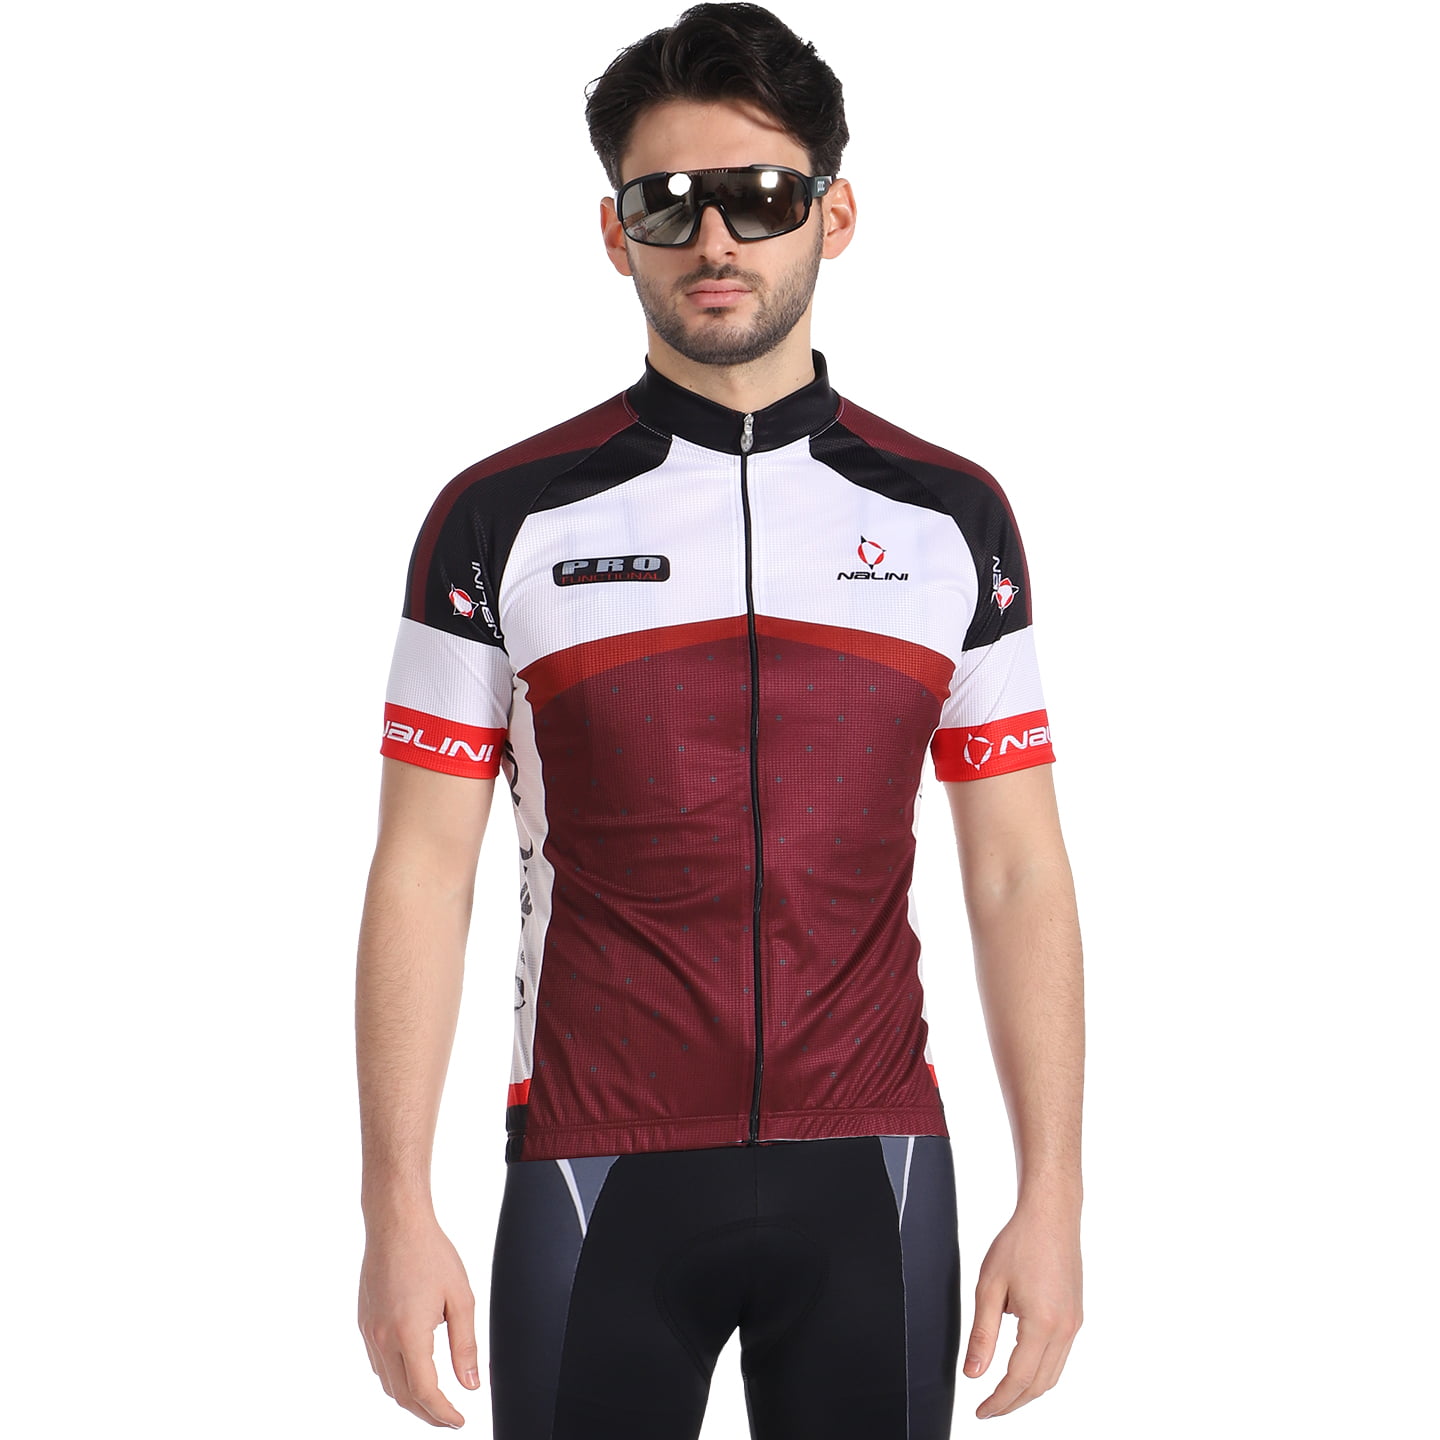 NALINI Ergo 2 Short Sleeve Jersey, for men, size L, Cycling jersey, Cycling clothing